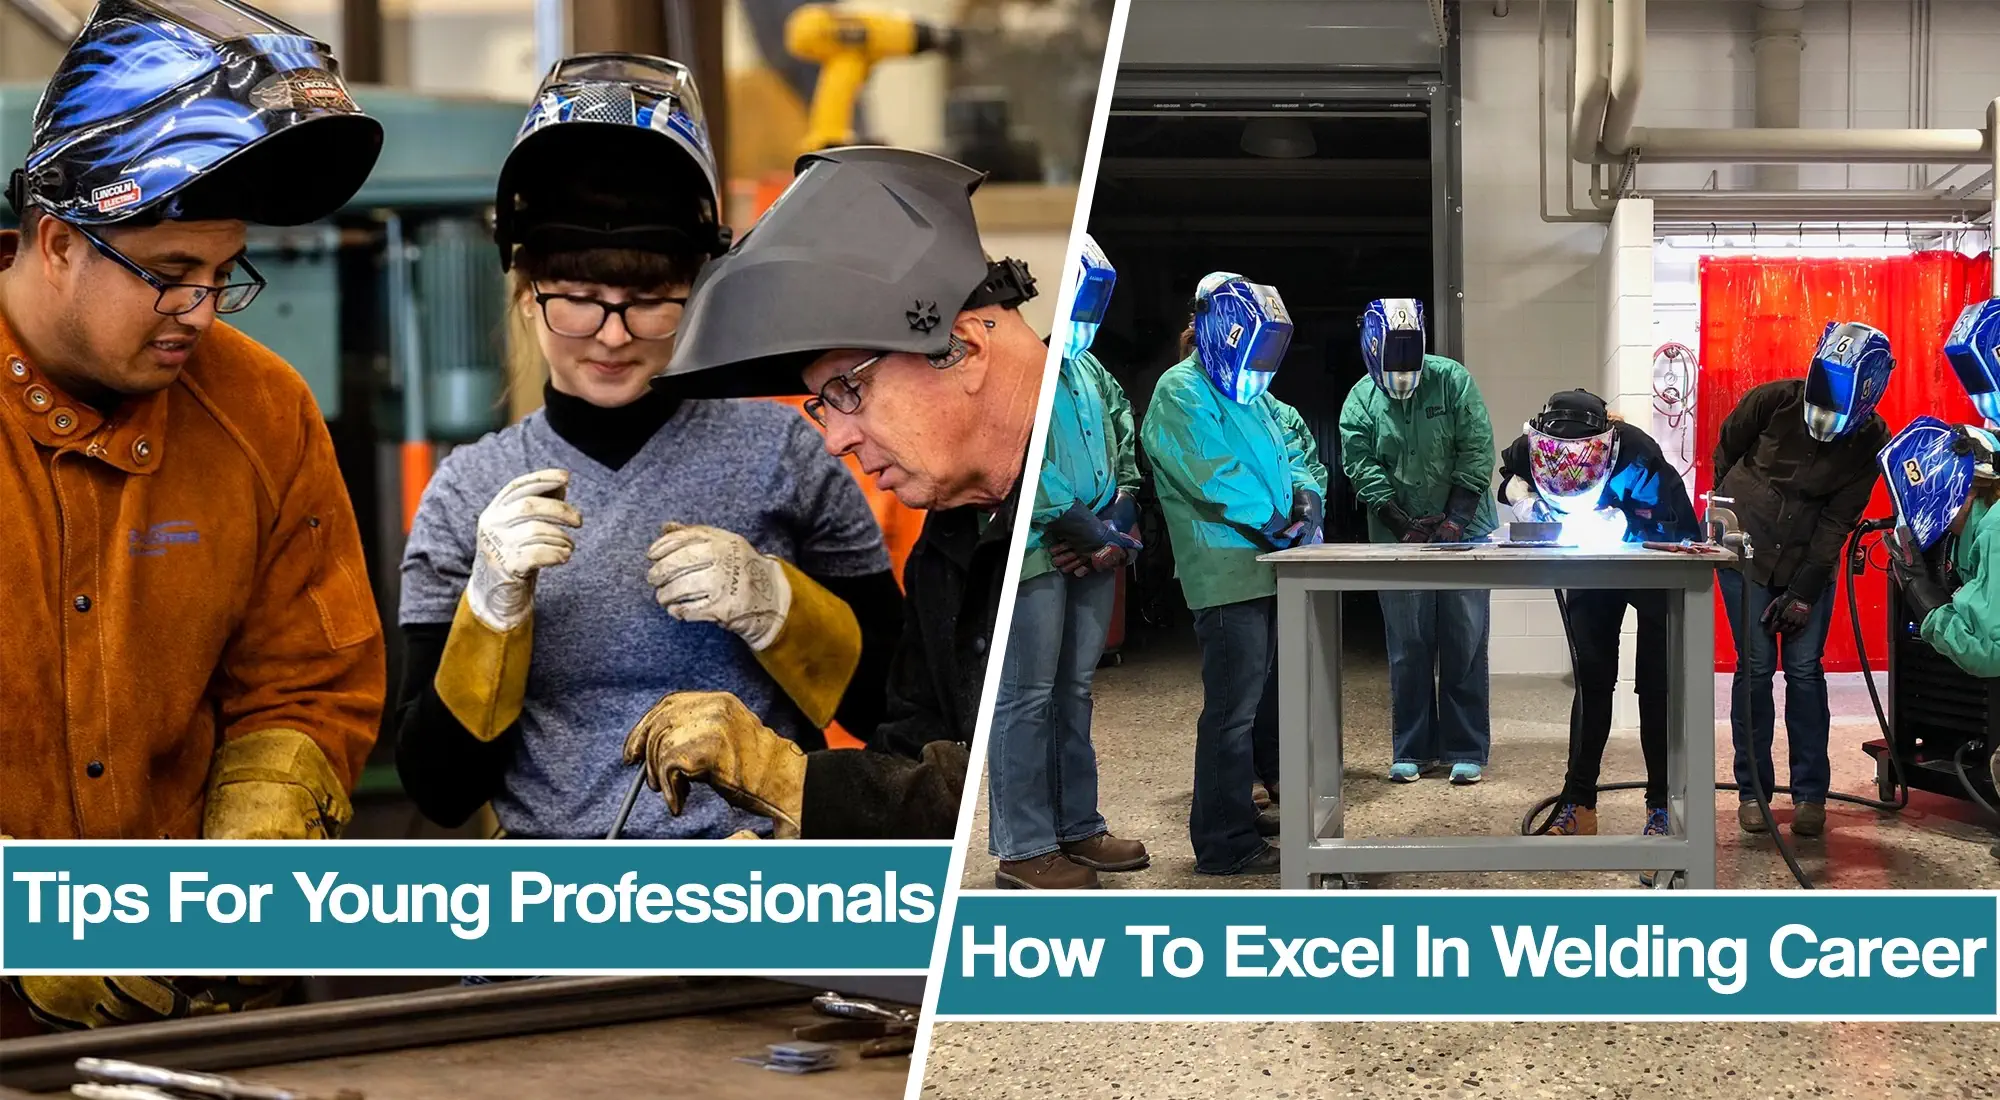 Tips For Young Welding Professionals – How To Act In Specific Situations